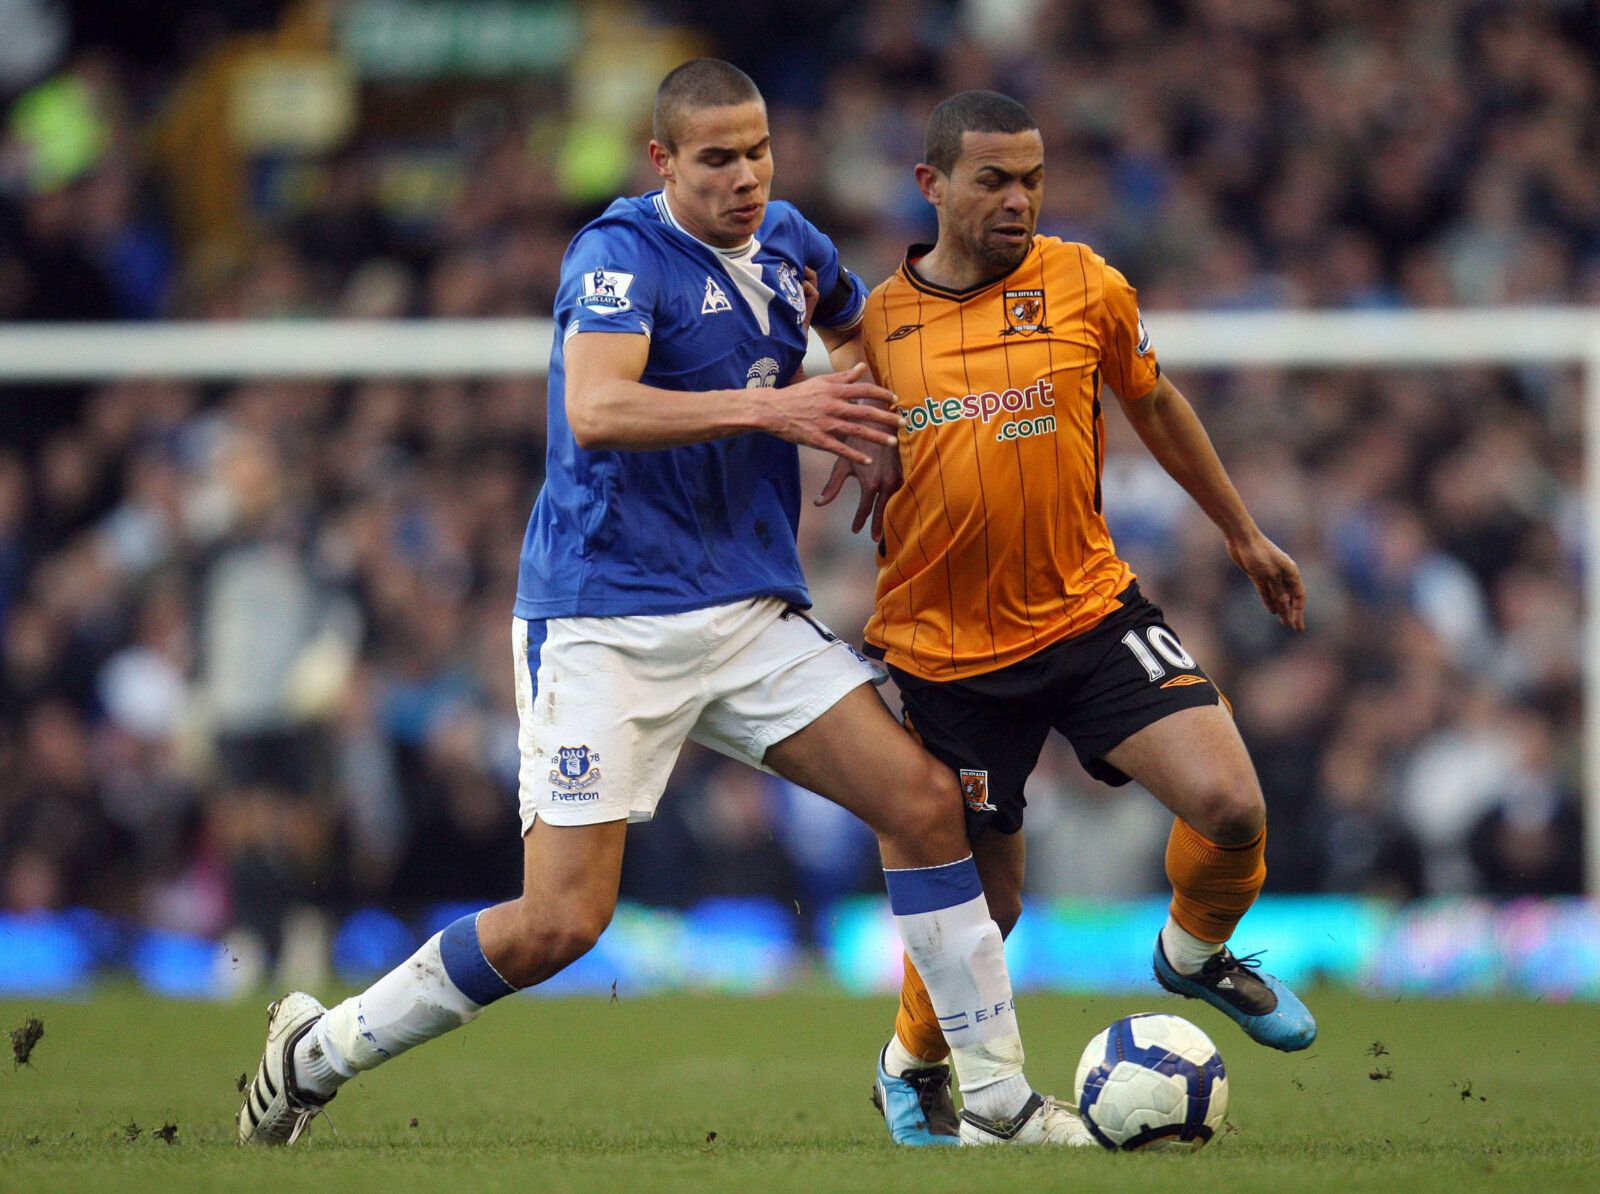 Football - Everton v Hull City Barclays Premier League  - Goodison Park - 09/10 - 7/3/10 
Everton's Jack Rodwell (L) and Hull's Geovanni in action 
Mandatory Credit: Action Images / Carl Recine 
Livepic 
NO ONLINE/INTERNET USE WITHOUT A LICENCE FROM THE FOOTBALL DATA CO LTD. FOR LICENCE ENQUIRIES PLEASE TELEPHONE +44 (0) 207 864 9000.